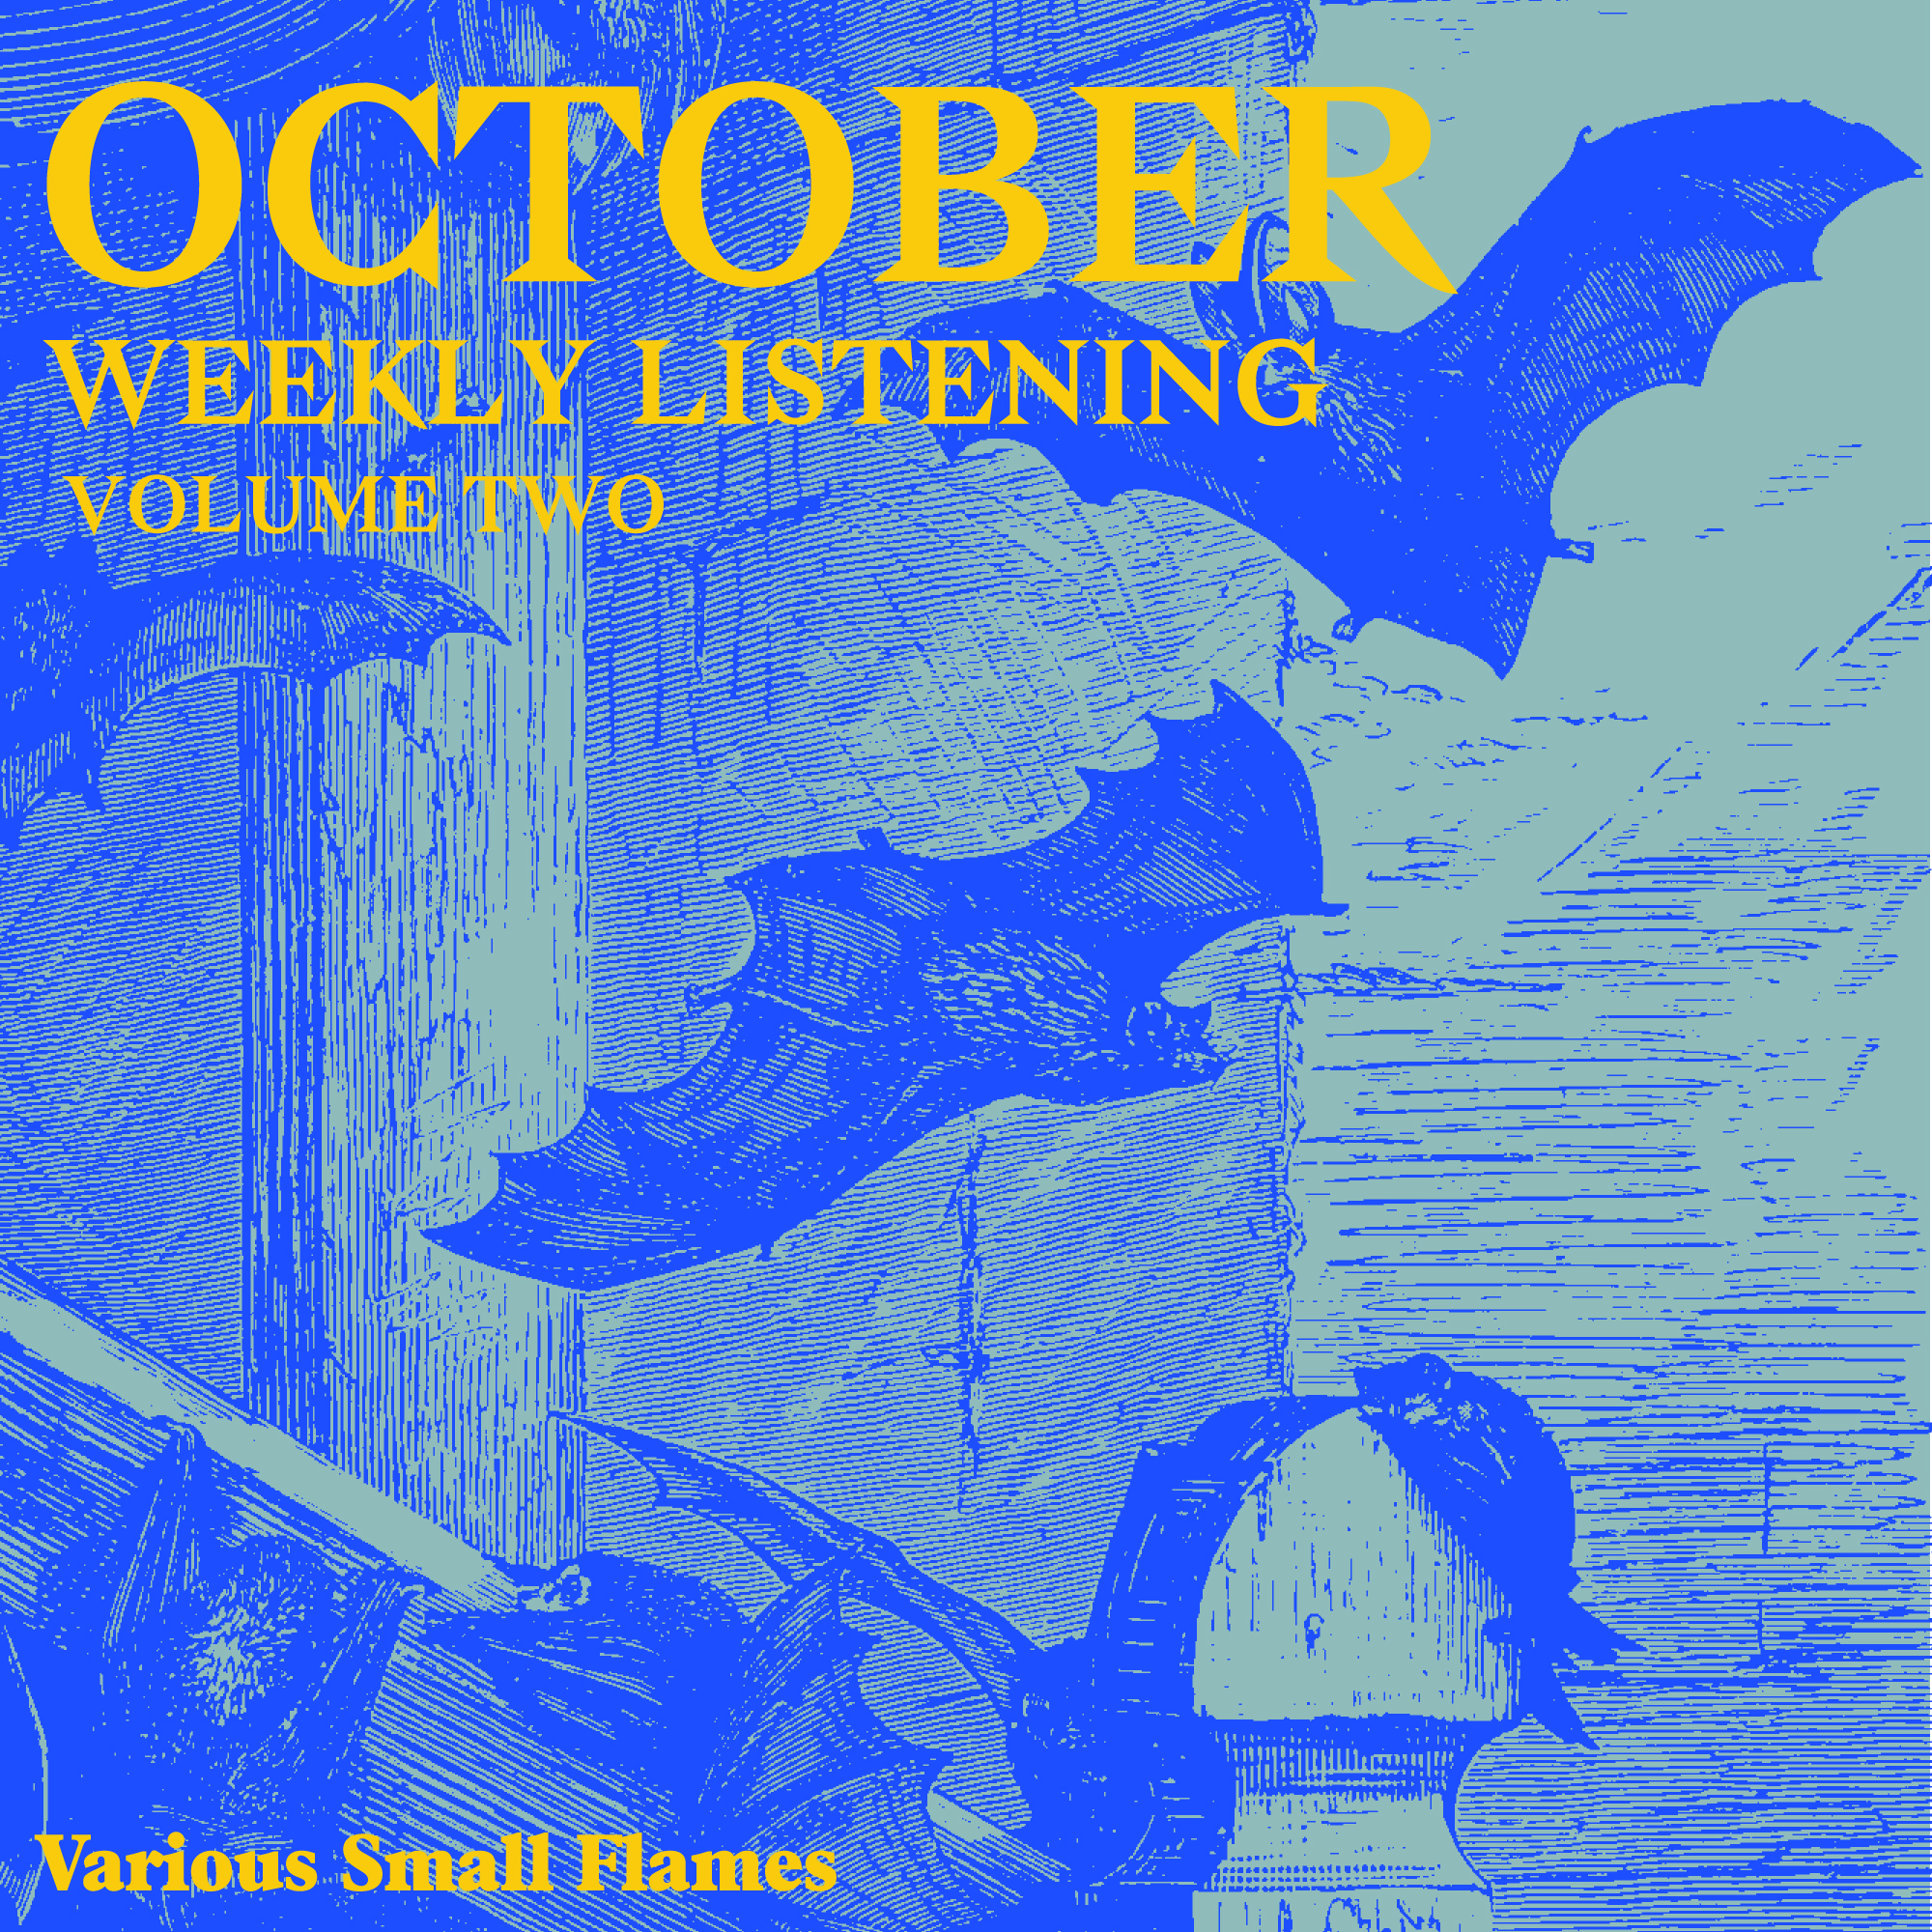 an etching of bats with the text October Weekly Listening, Volume Two, Various Small Flames